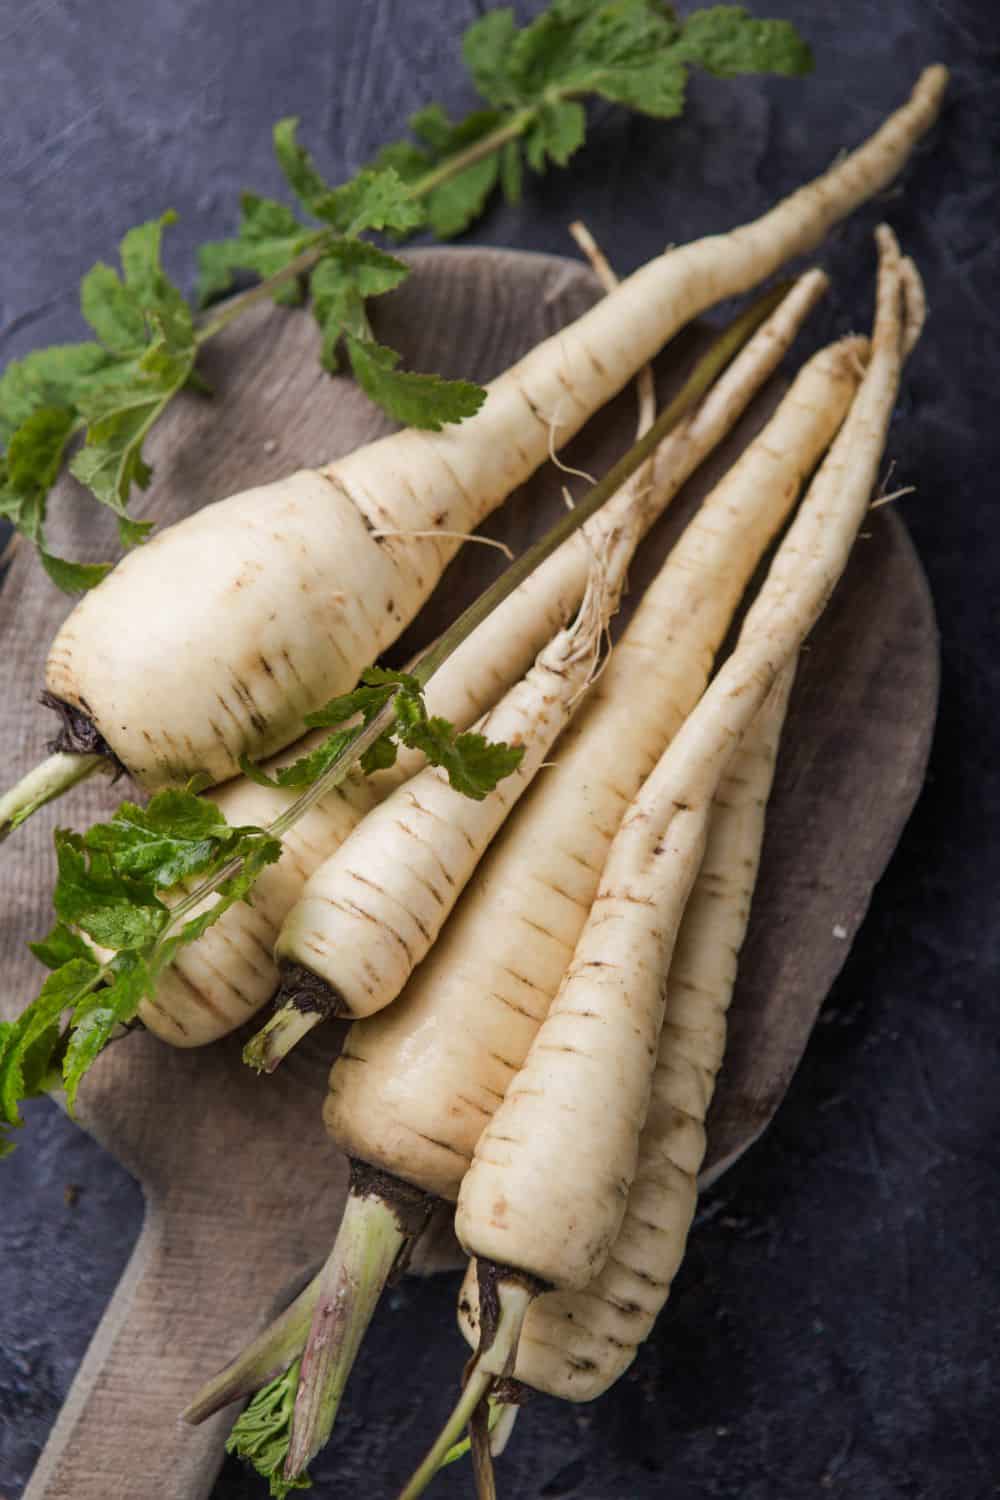 Bundle of fresh organic parsnip over gray texture background.